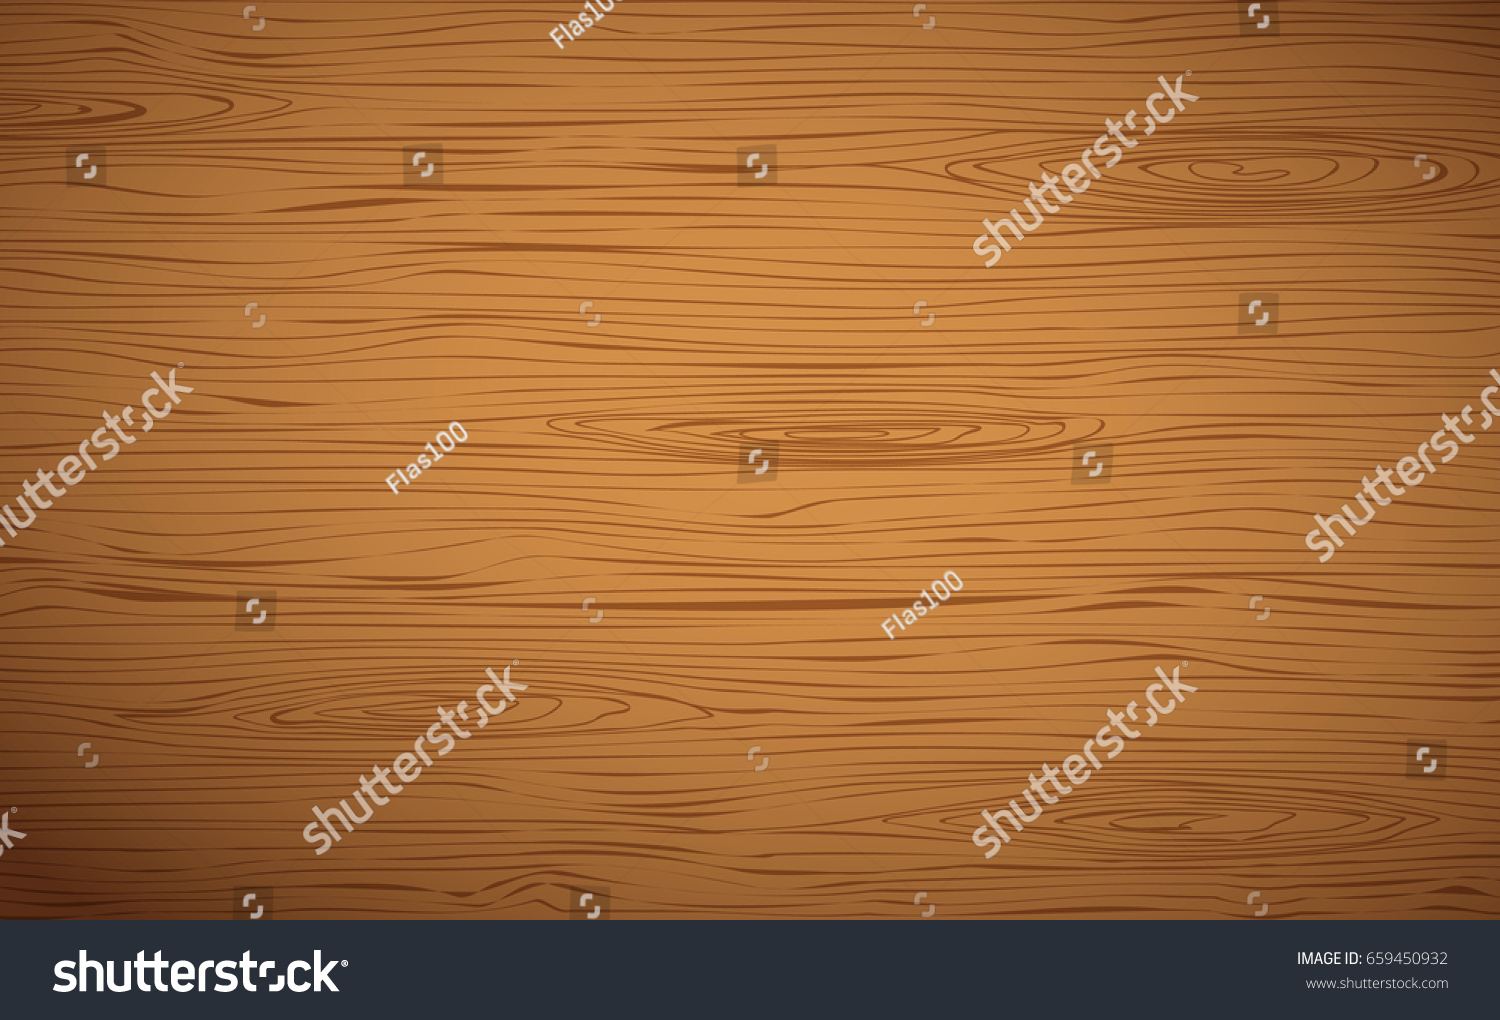 Brown wooden wall, plank, table or floor surface. Cutting chopping board. Wood texture. #659450932